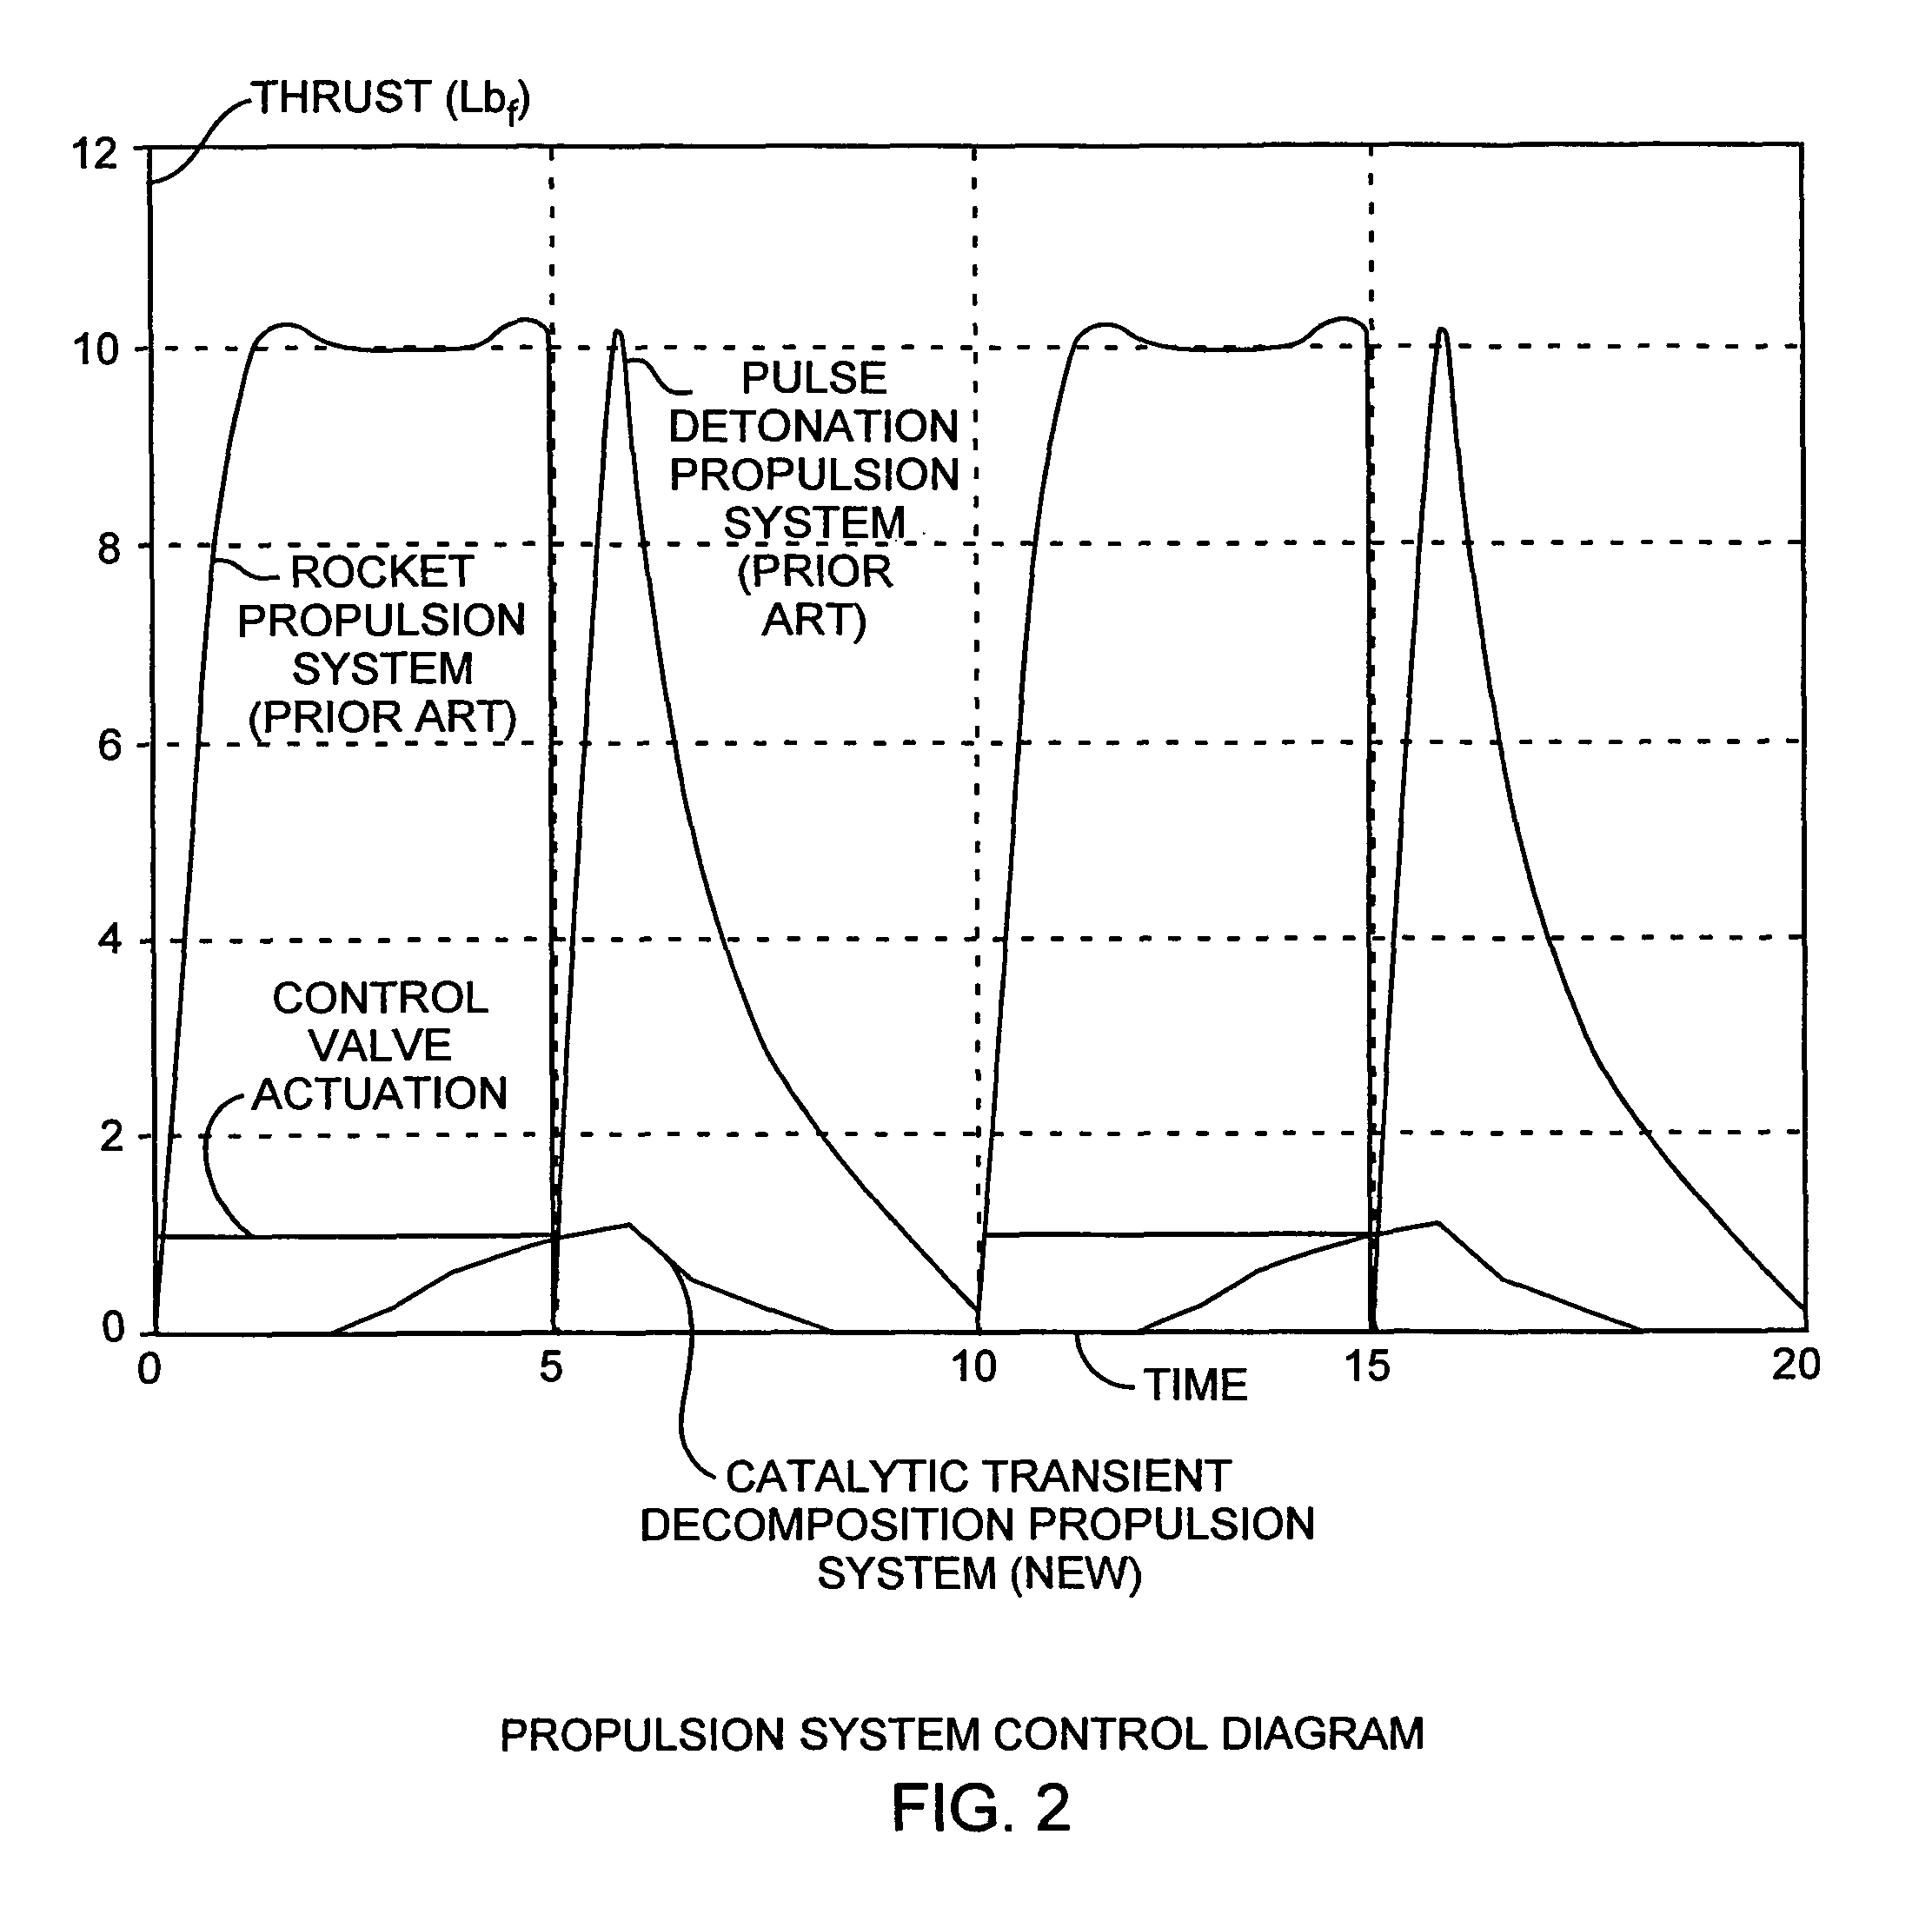 Catalytically activated transient decomposition propulsion system